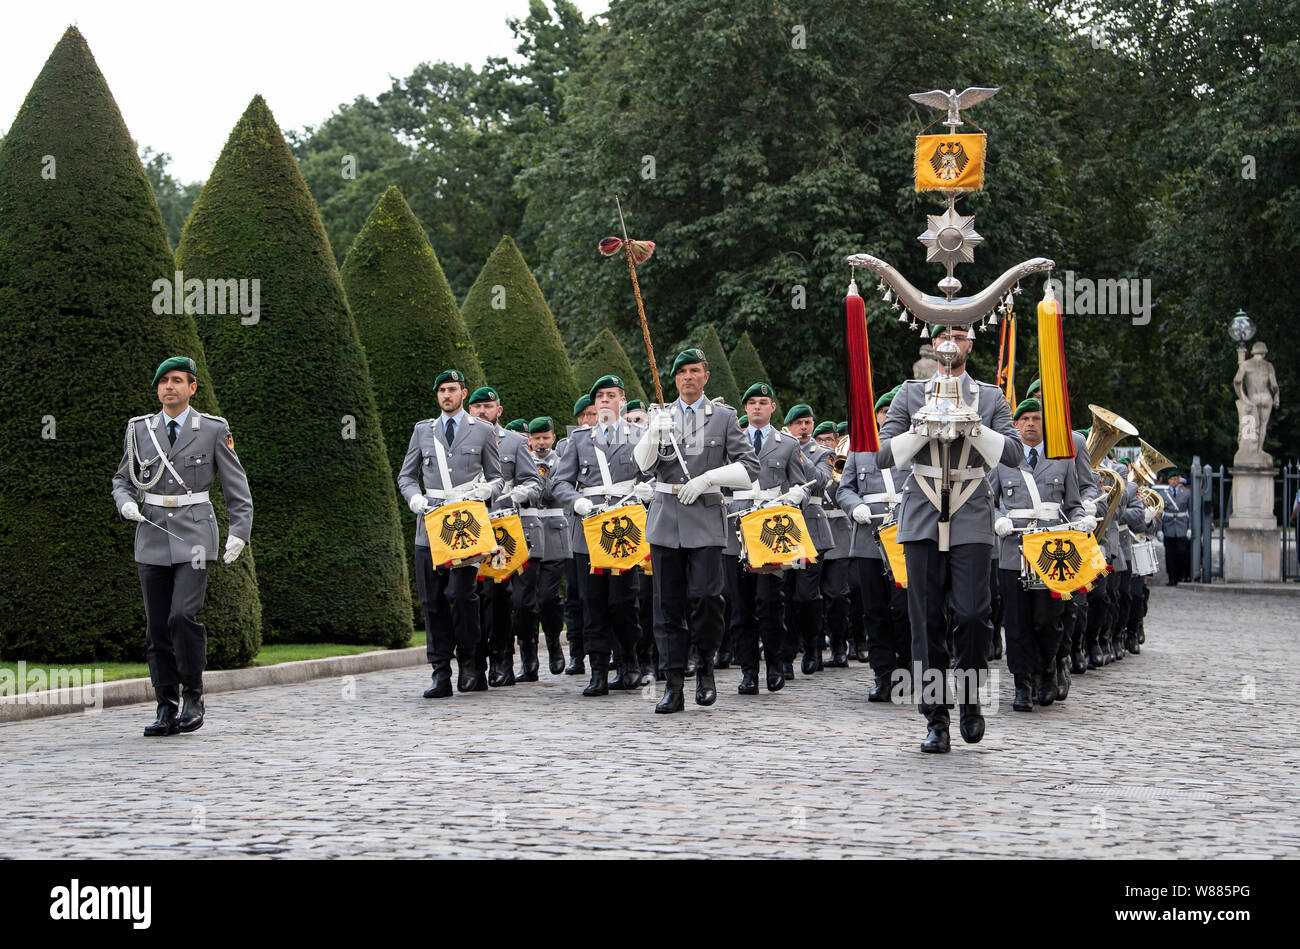 Berlin, Germany. 08th Aug, 2019. The Bundeswehr Staff Music Corps marches through the entrance to Schloss Bellevue before the Portuguese President is greeted by the Federal President. The Staff Music Corps is responsible for welcoming the state guests of the Federal President, the Federal Chancellor and the Ministry of Defence. Credit: Bernd von Jutrczenka/dpa/Alamy Live News Stock Photo